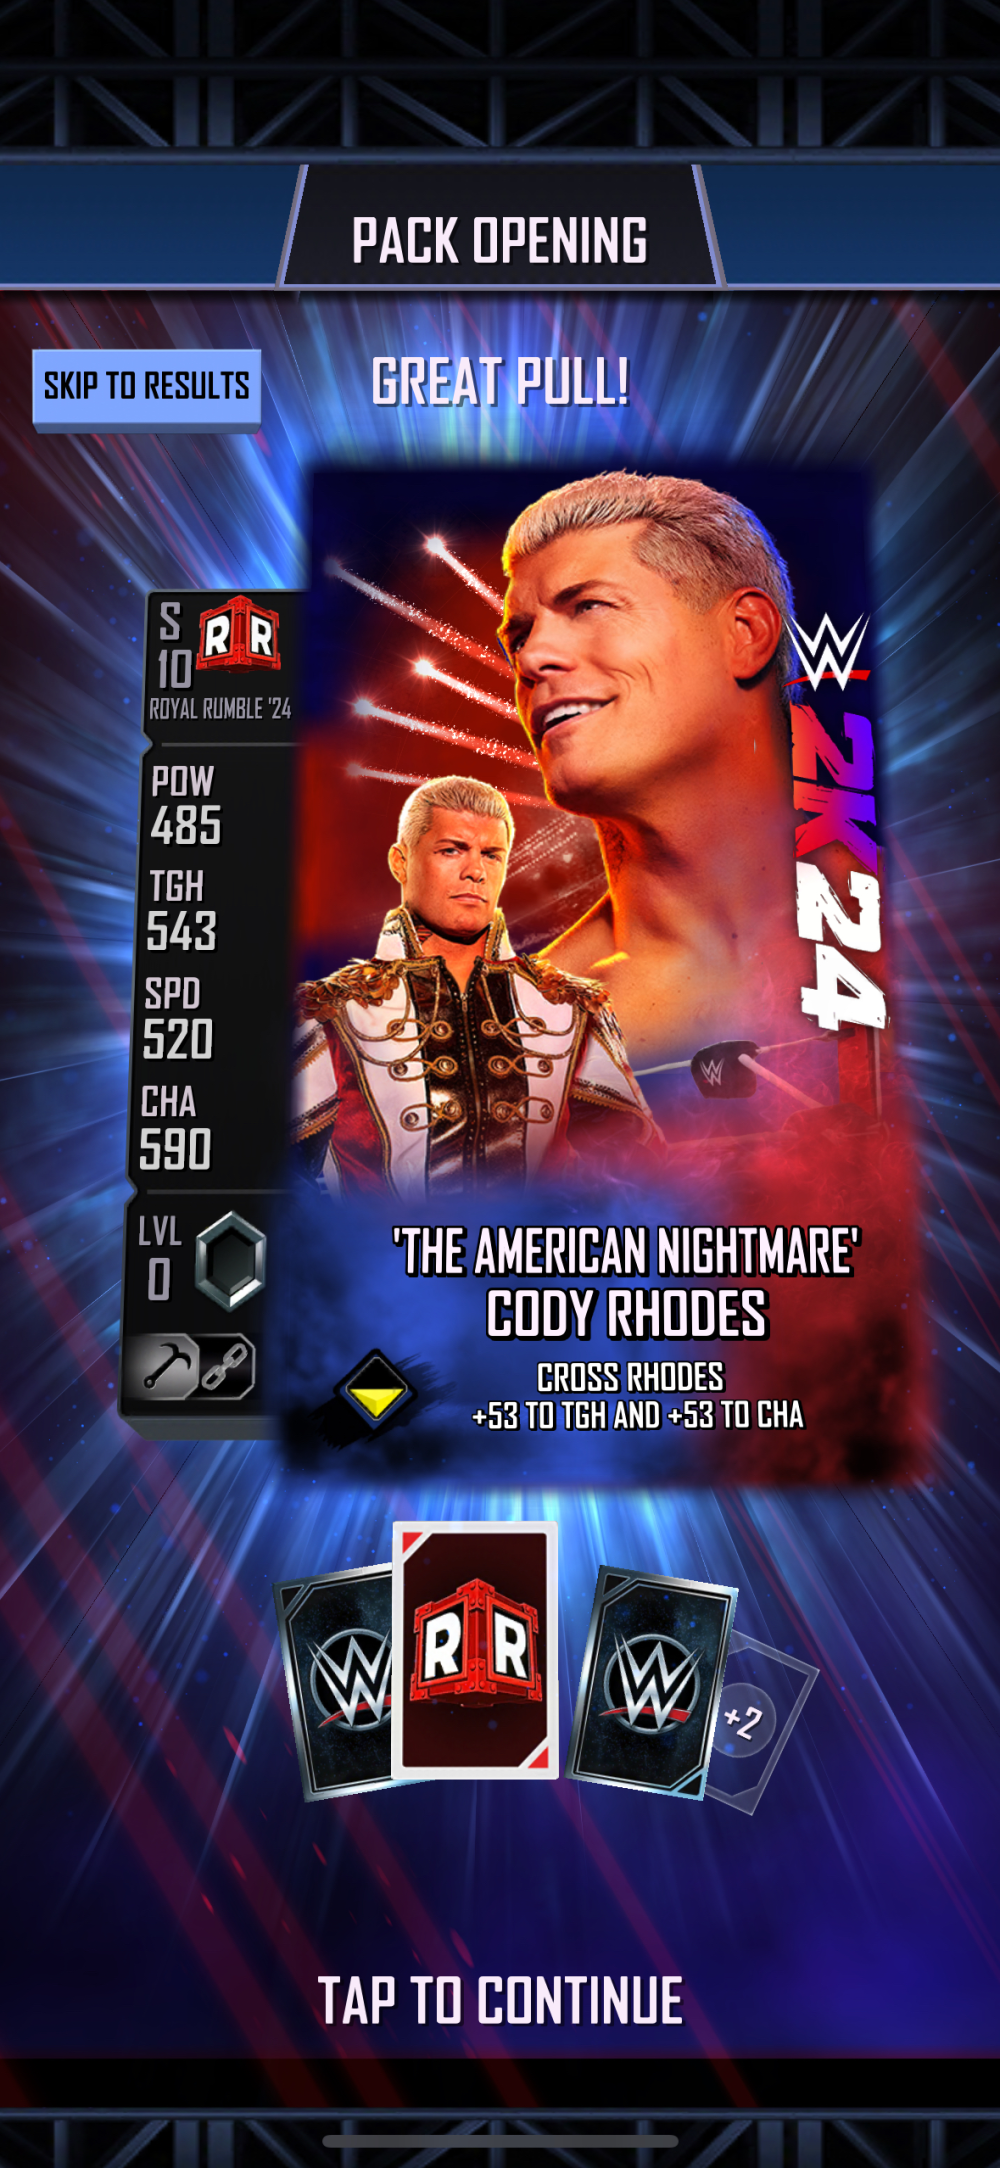 The Cody Rhodes pro card in WWE Supercard